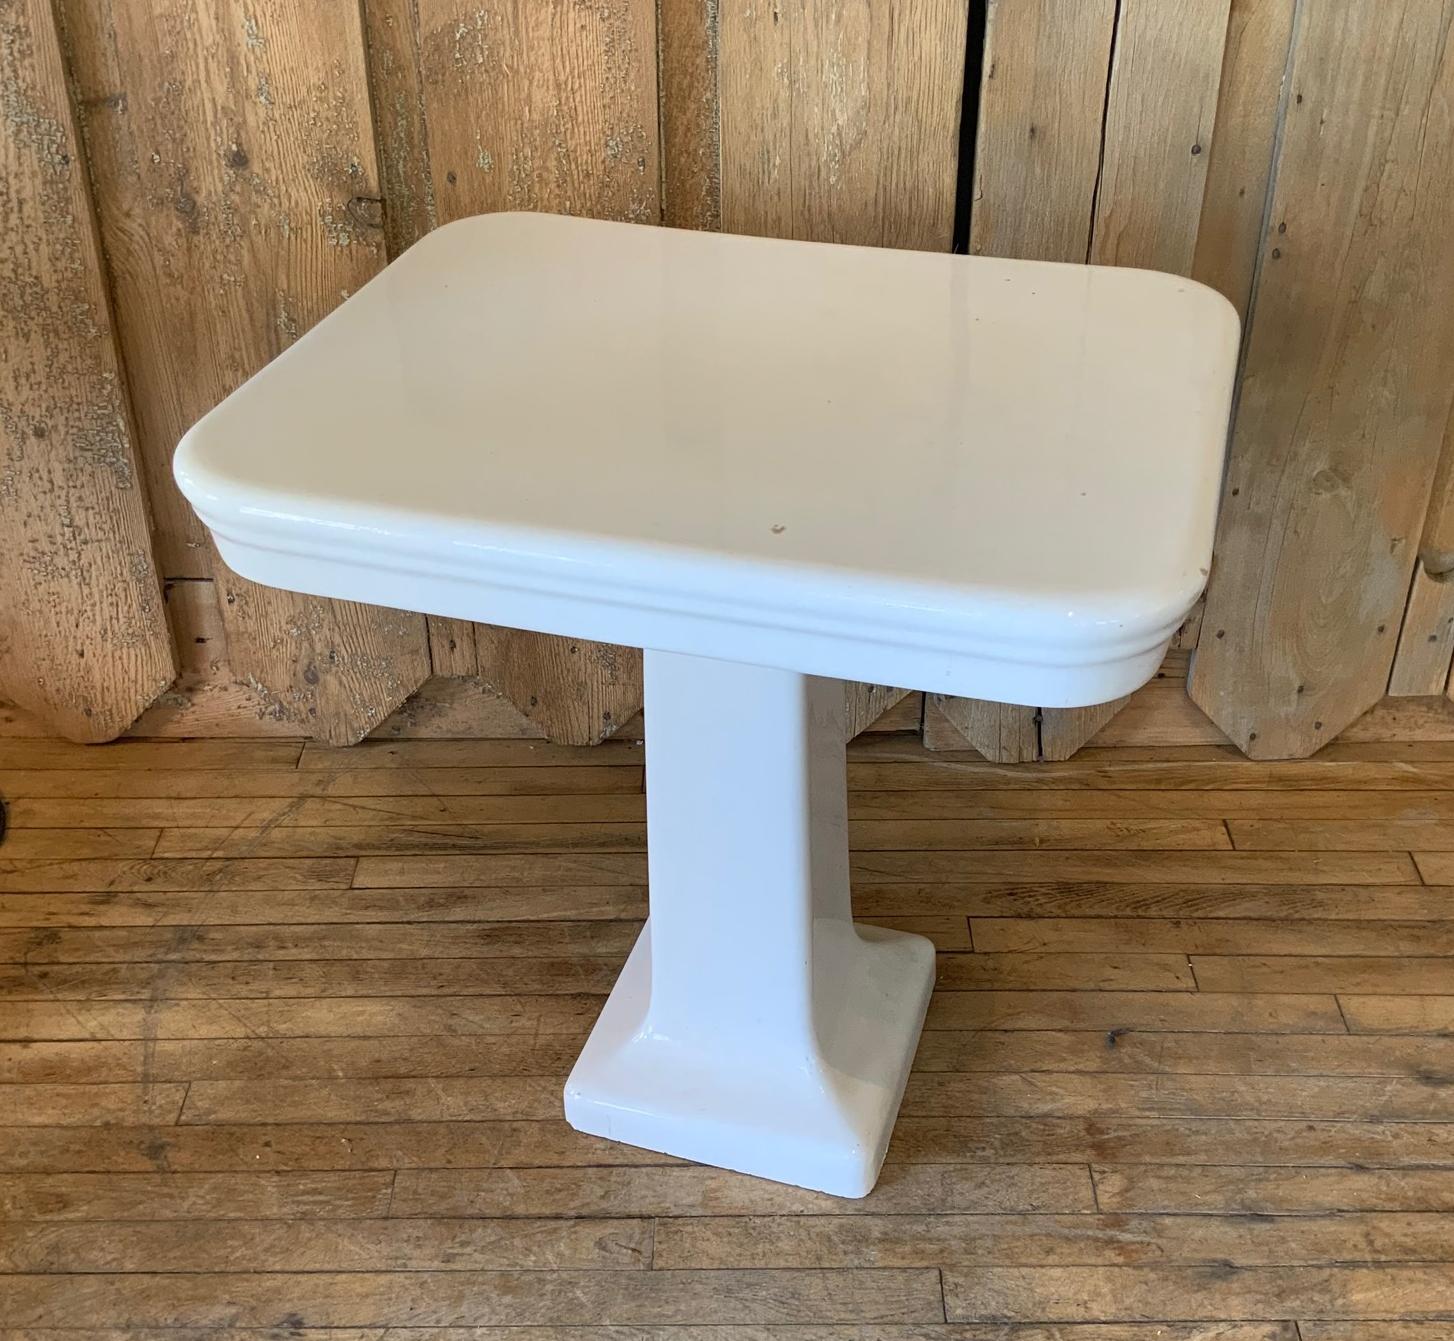 Early 20th Century Antique French Porcelain Pedestal Wash Stand